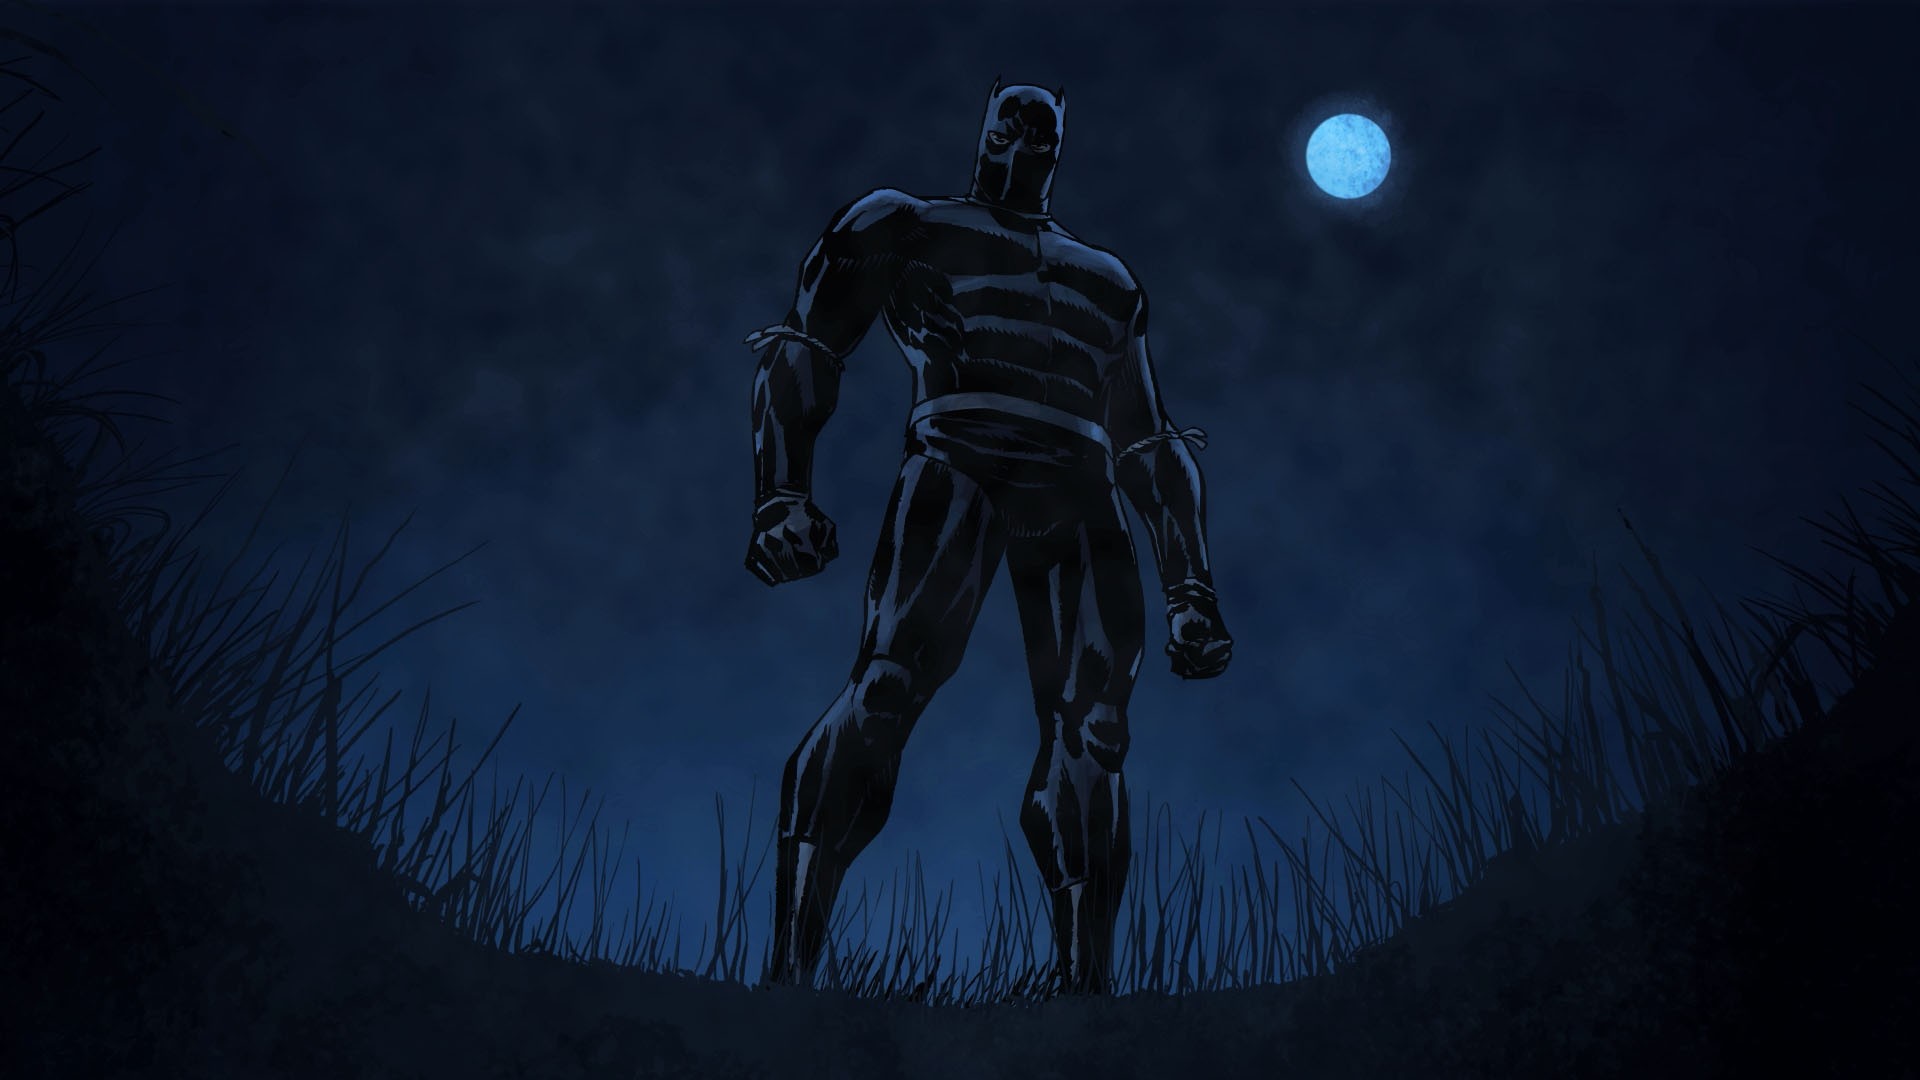 Awesome Android Wallpapers #android #androidwallpaper Black Panther